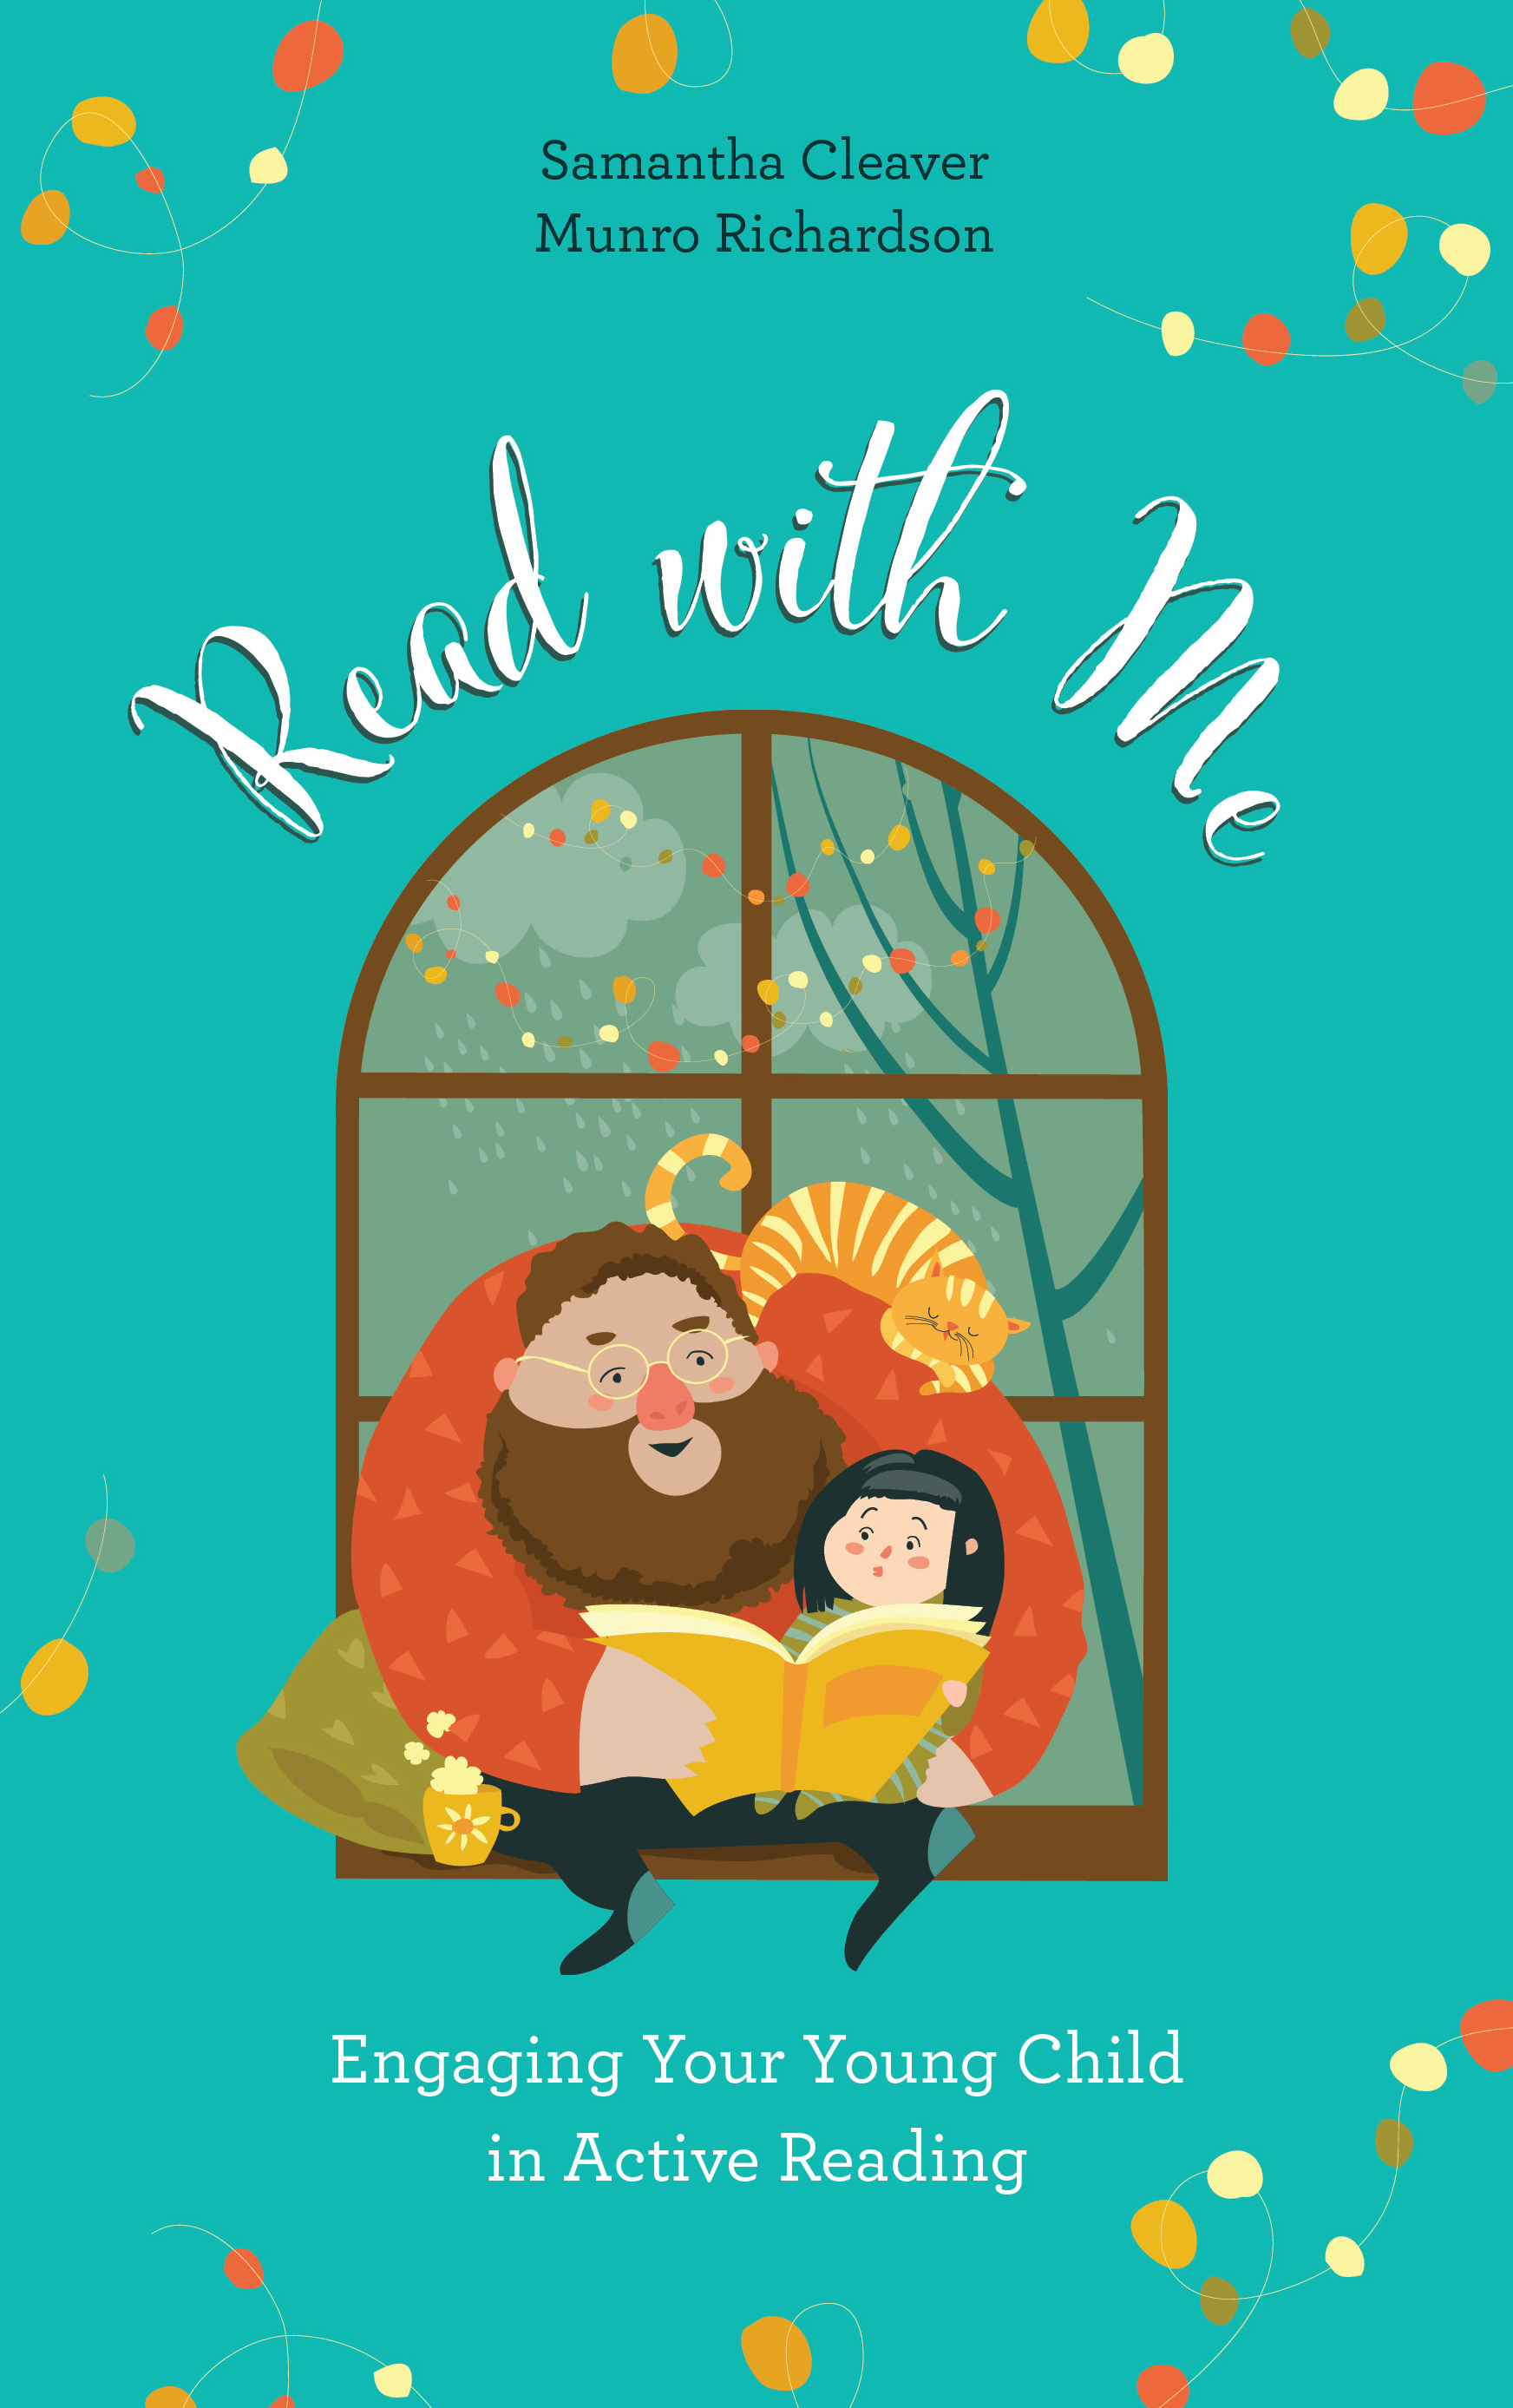 Read with Me: Engaging Your Young Child in Active Reading